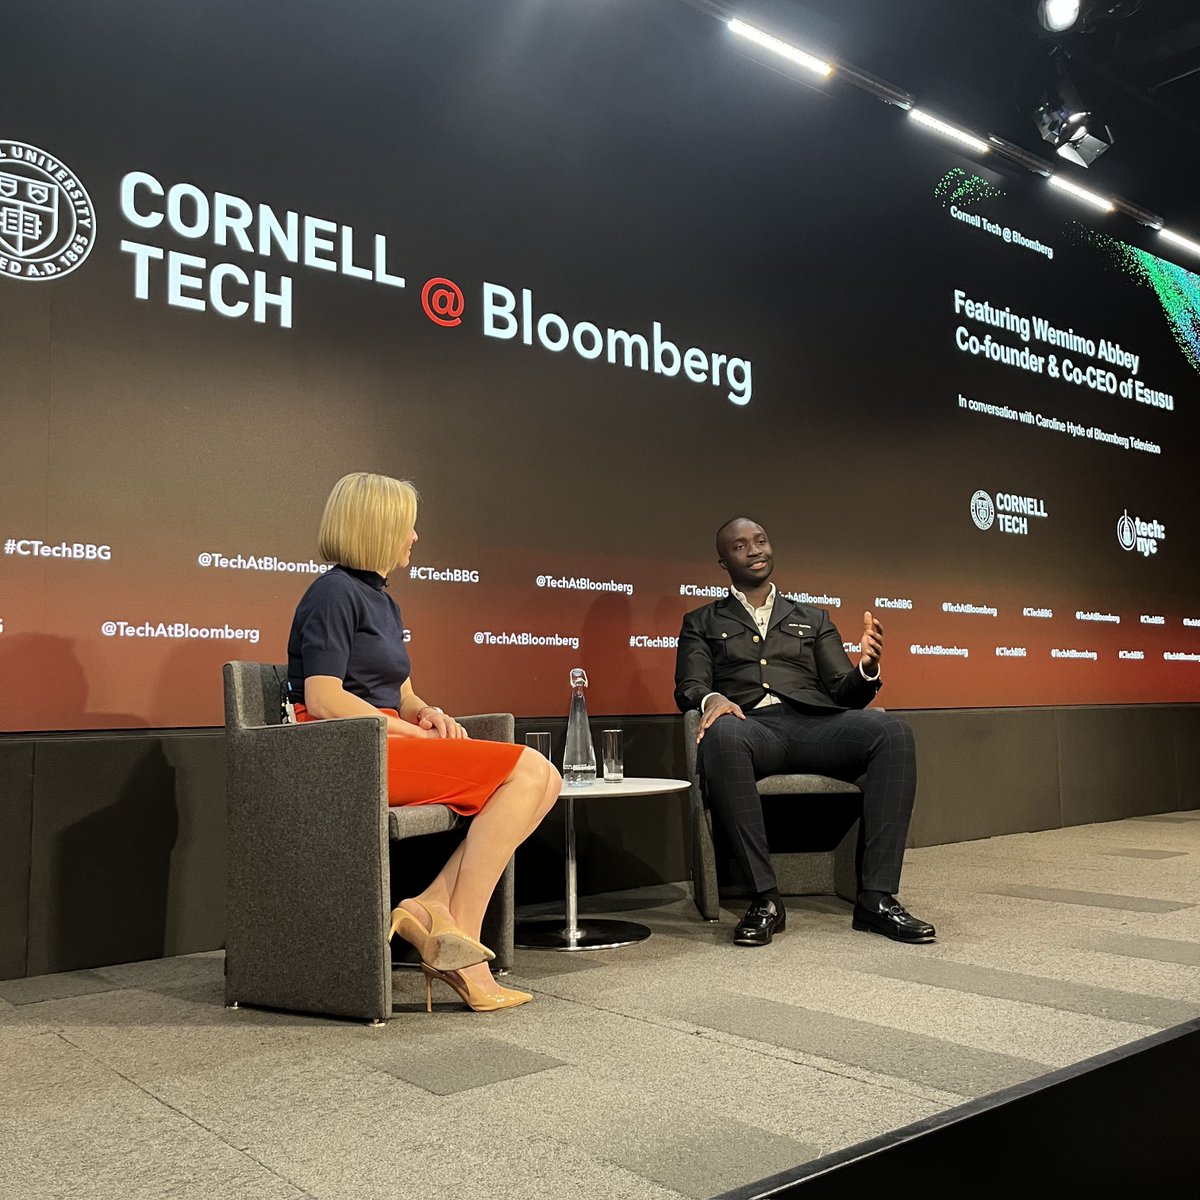 A look back at yesterday's @cornell_tech at @TechAtBloomberg event featuring Esusu Co-Founder and Co-CEO, @Wemimo11. 📹👨‍💼

#justicecapitalism #blackfounders #CTechBBG